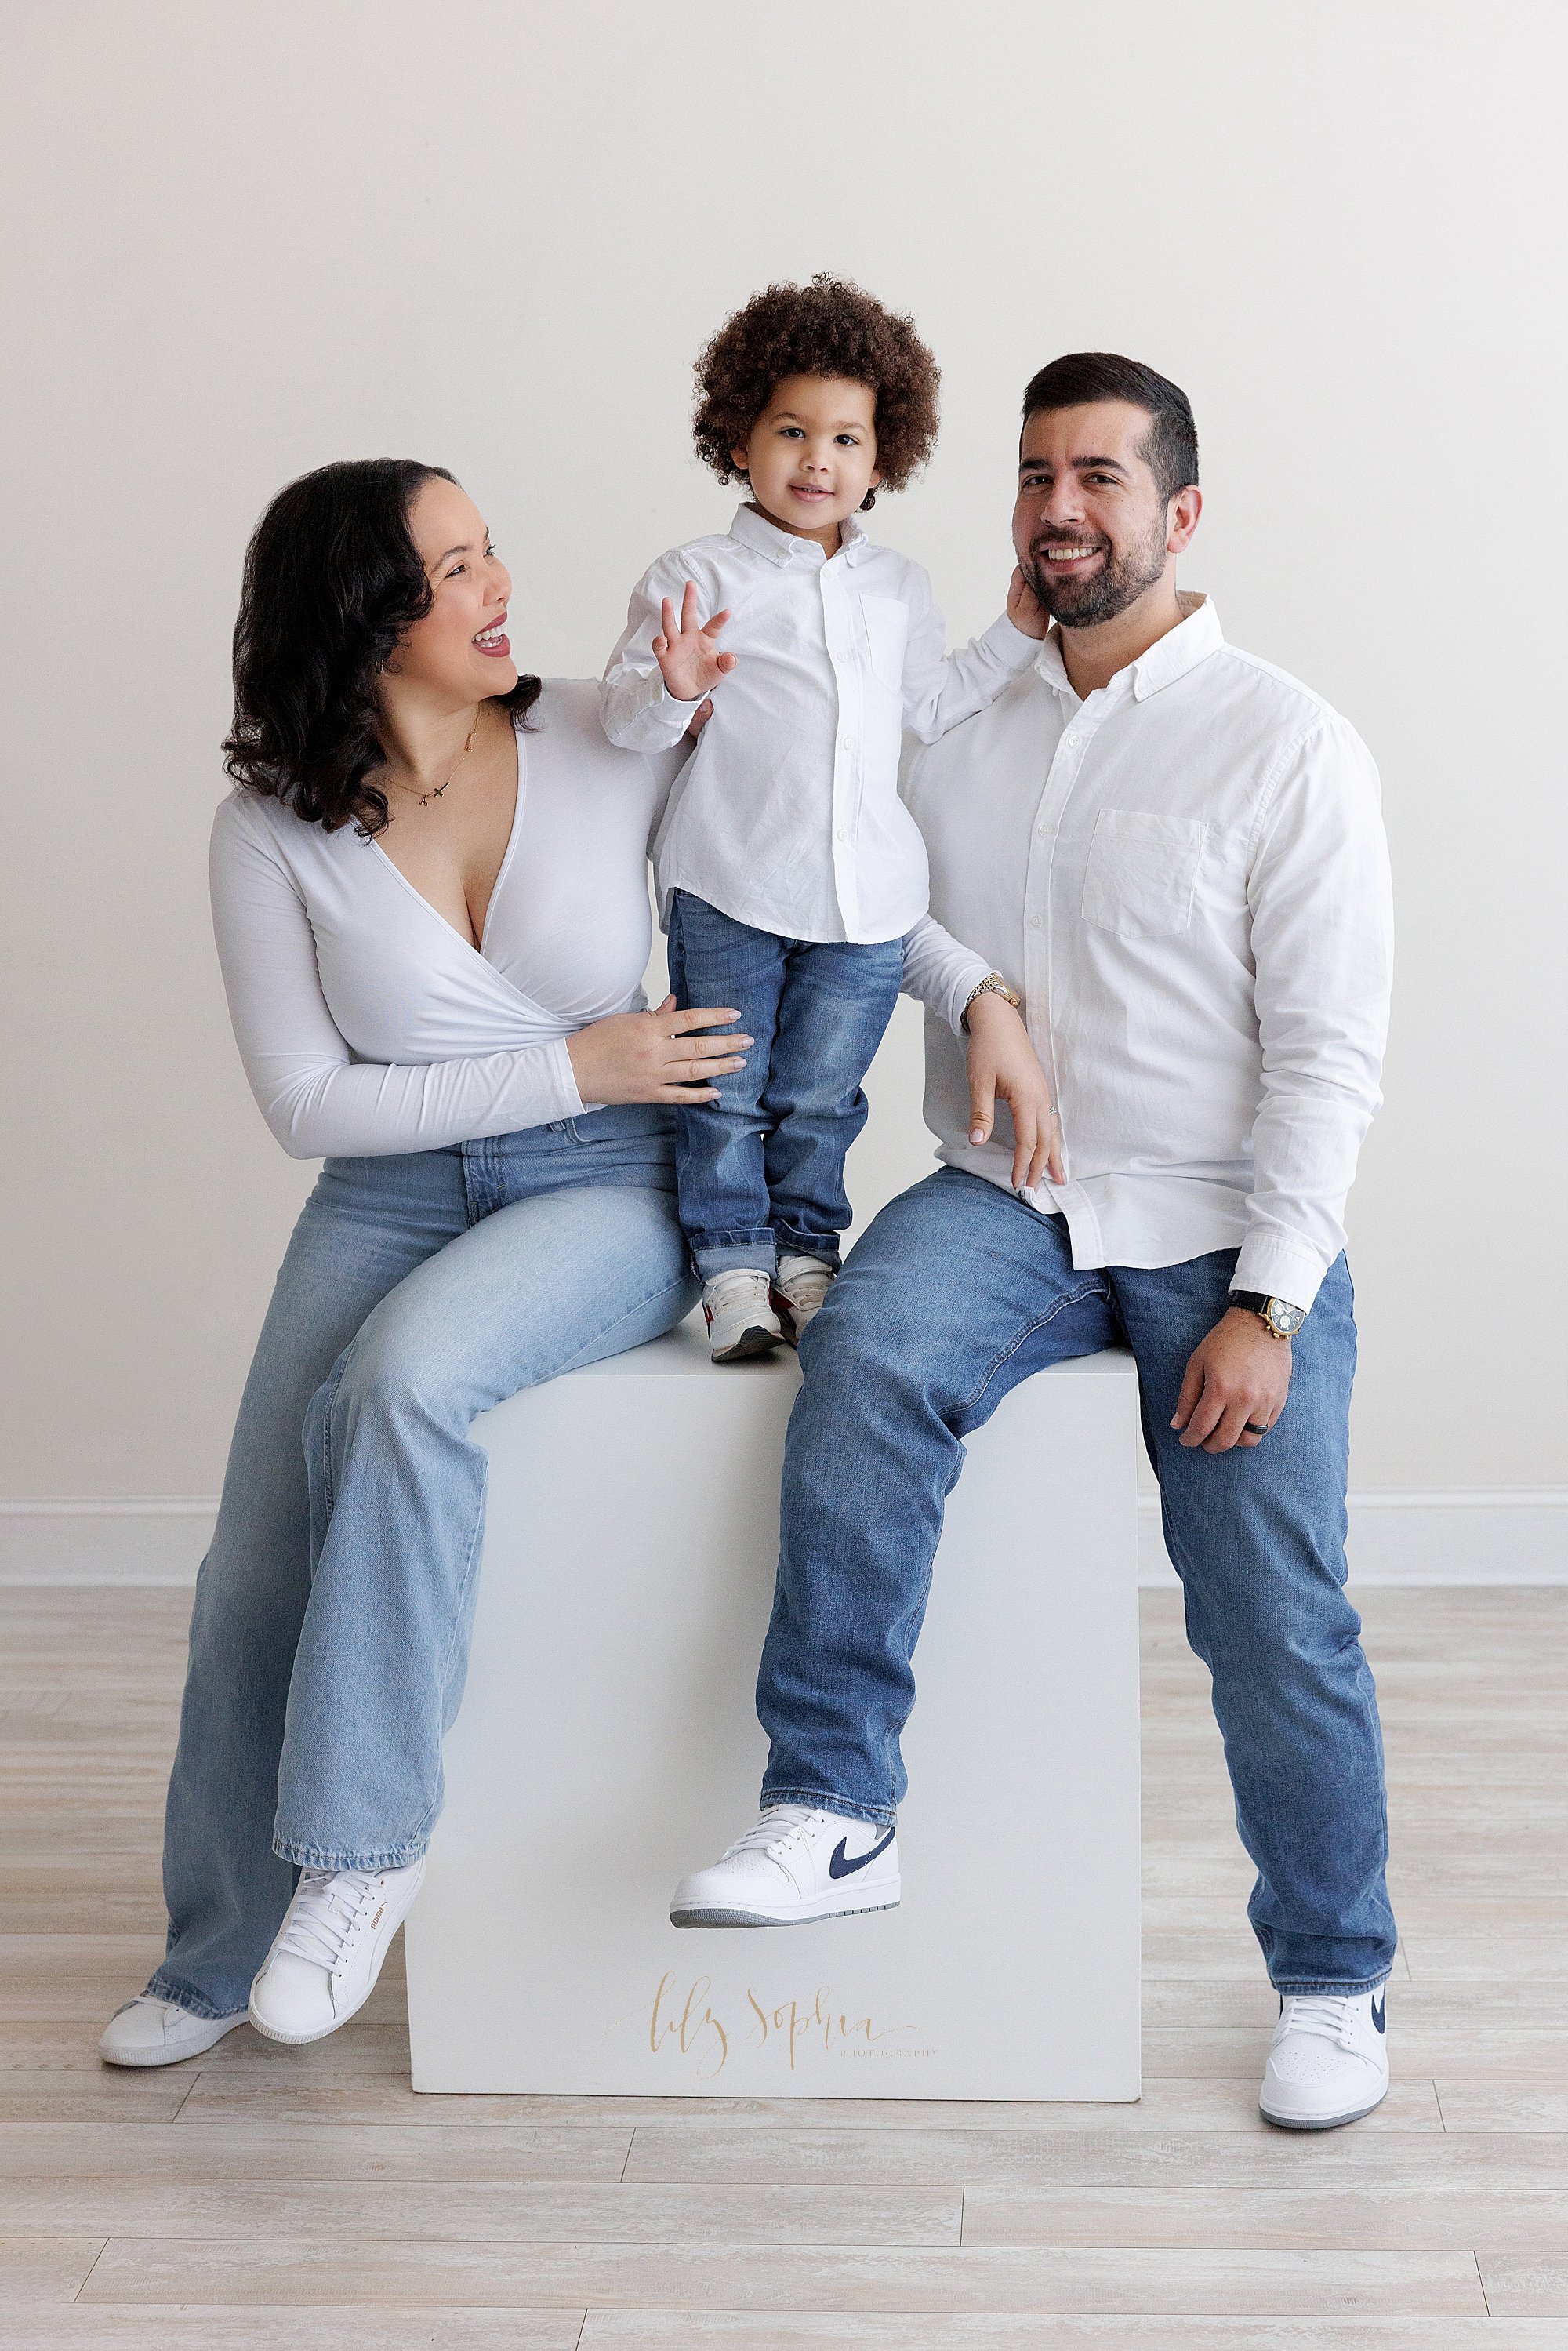  Family photo of a mother and father sitting on a large white cube with their young son standing between them taken using natural light in a photography studio near Oakhurst in Atlanta, Georgia. 